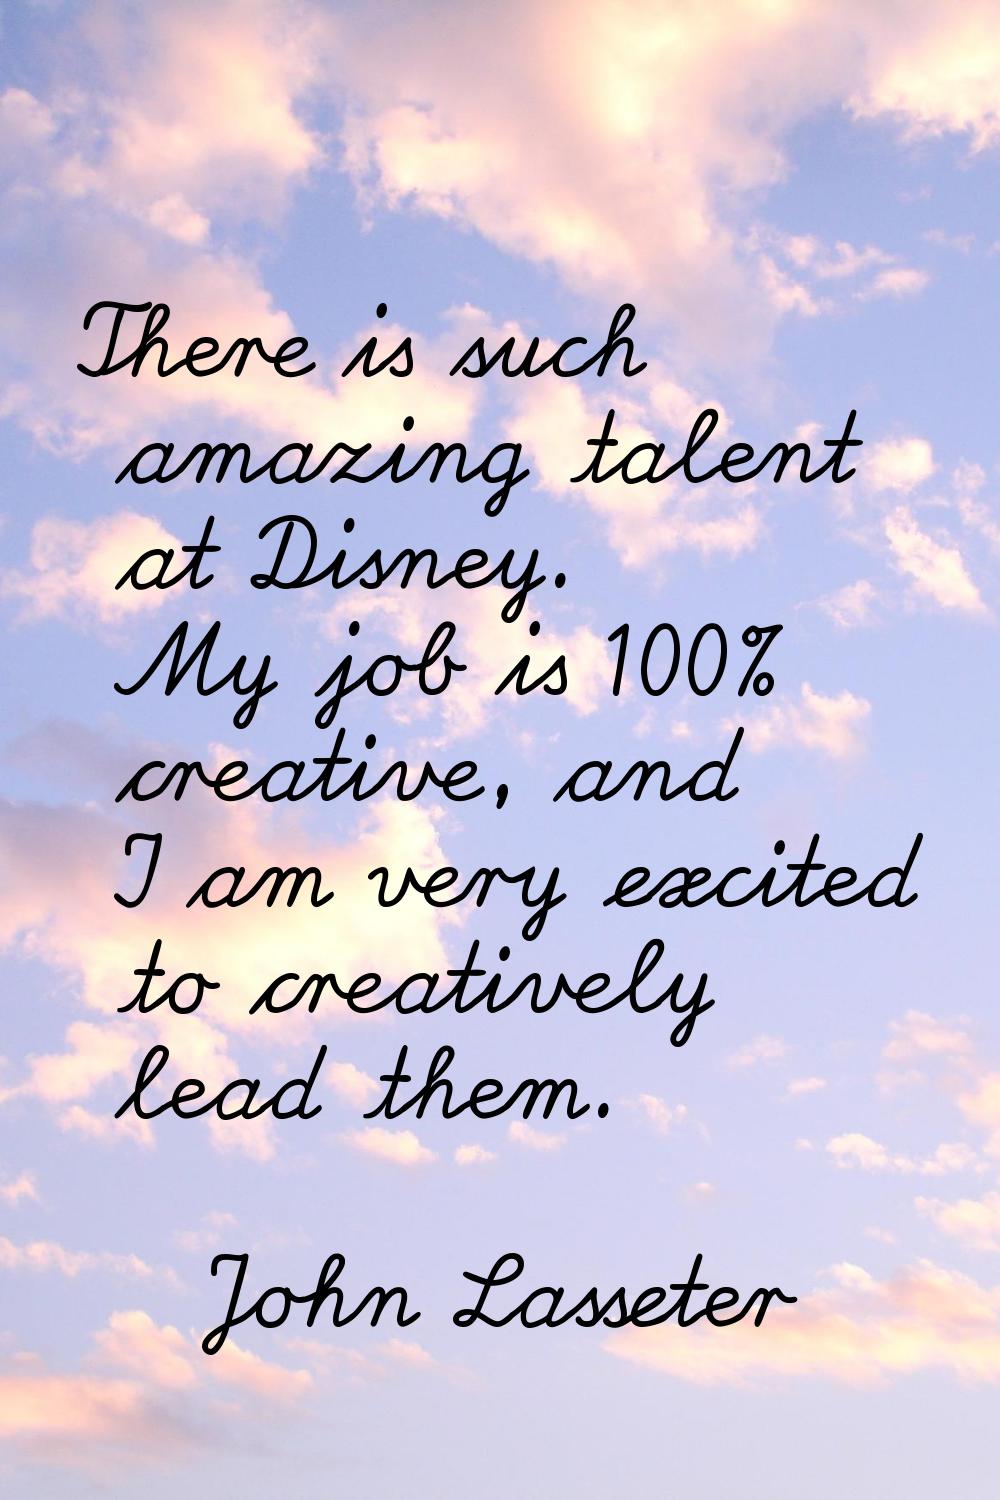 There is such amazing talent at Disney. My job is 100% creative, and I am very excited to creativel